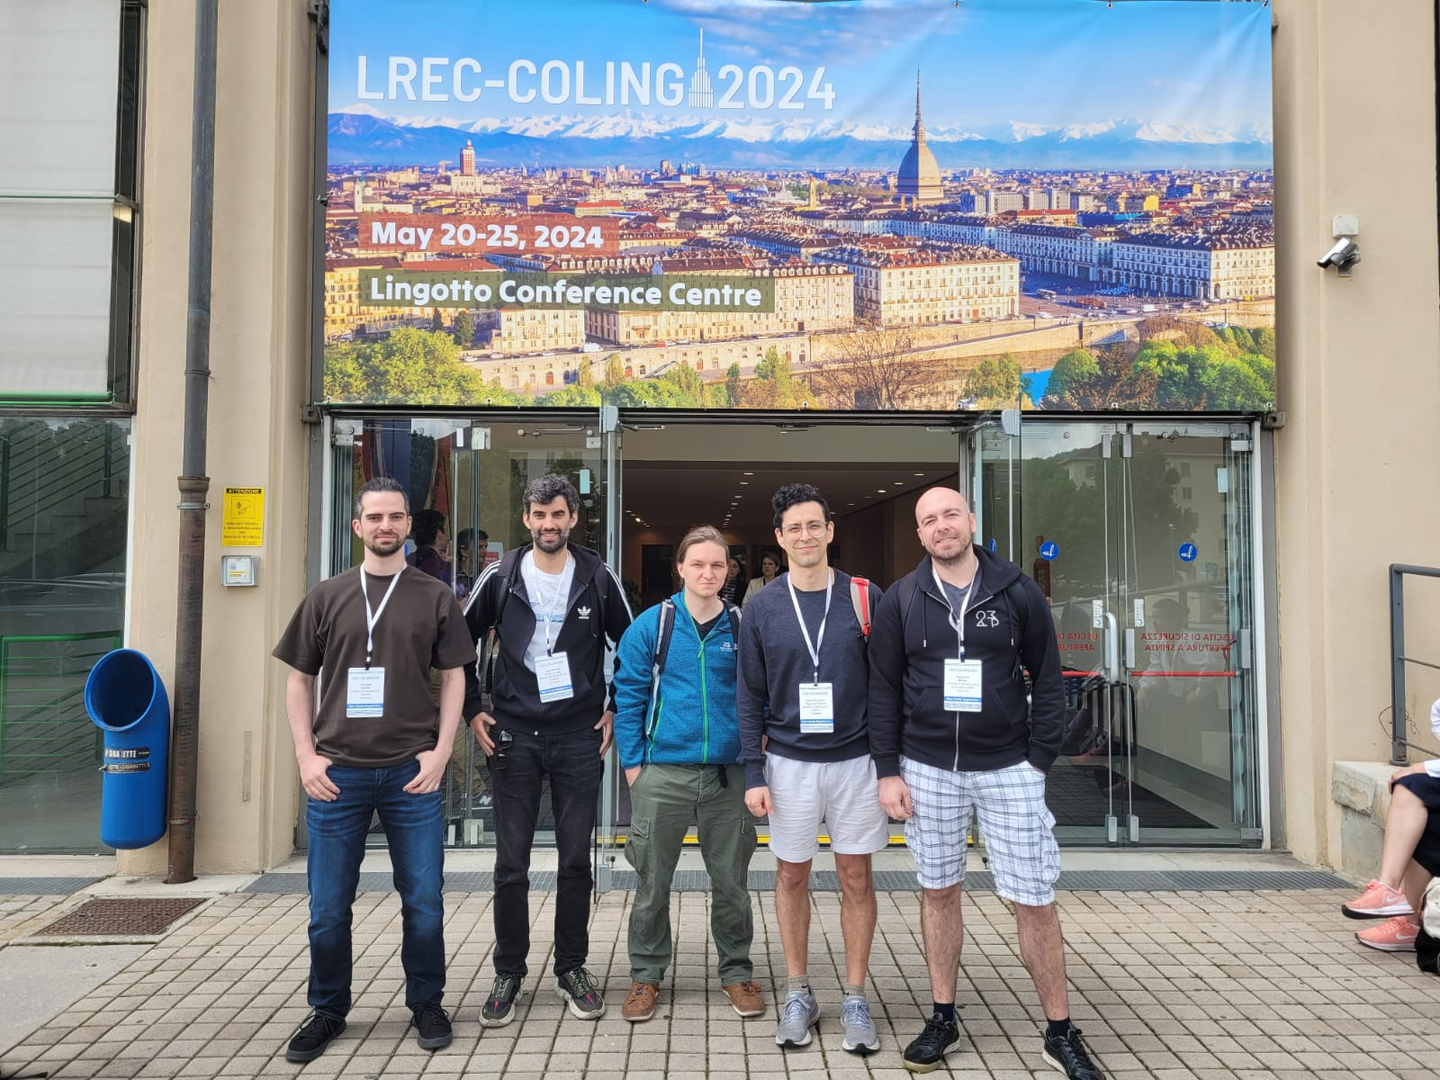 Boys hitting town @ LREC-Coling 2024 in Turin, Italy